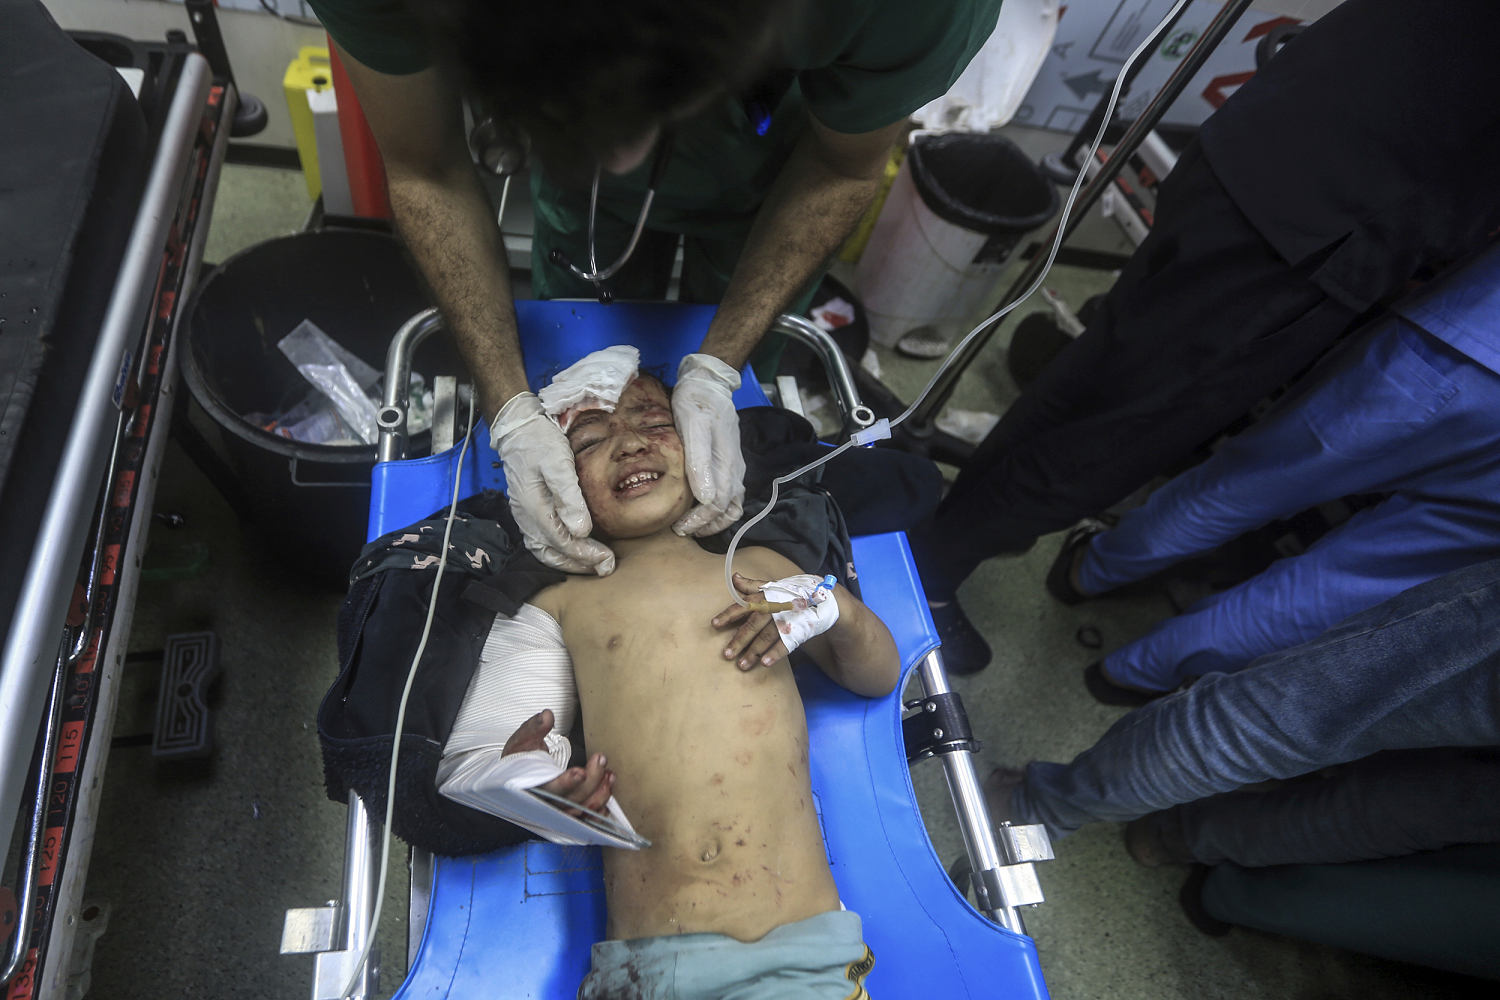 Efforts to evacuate some of Gaza’s biggest hospitals appear to be failing